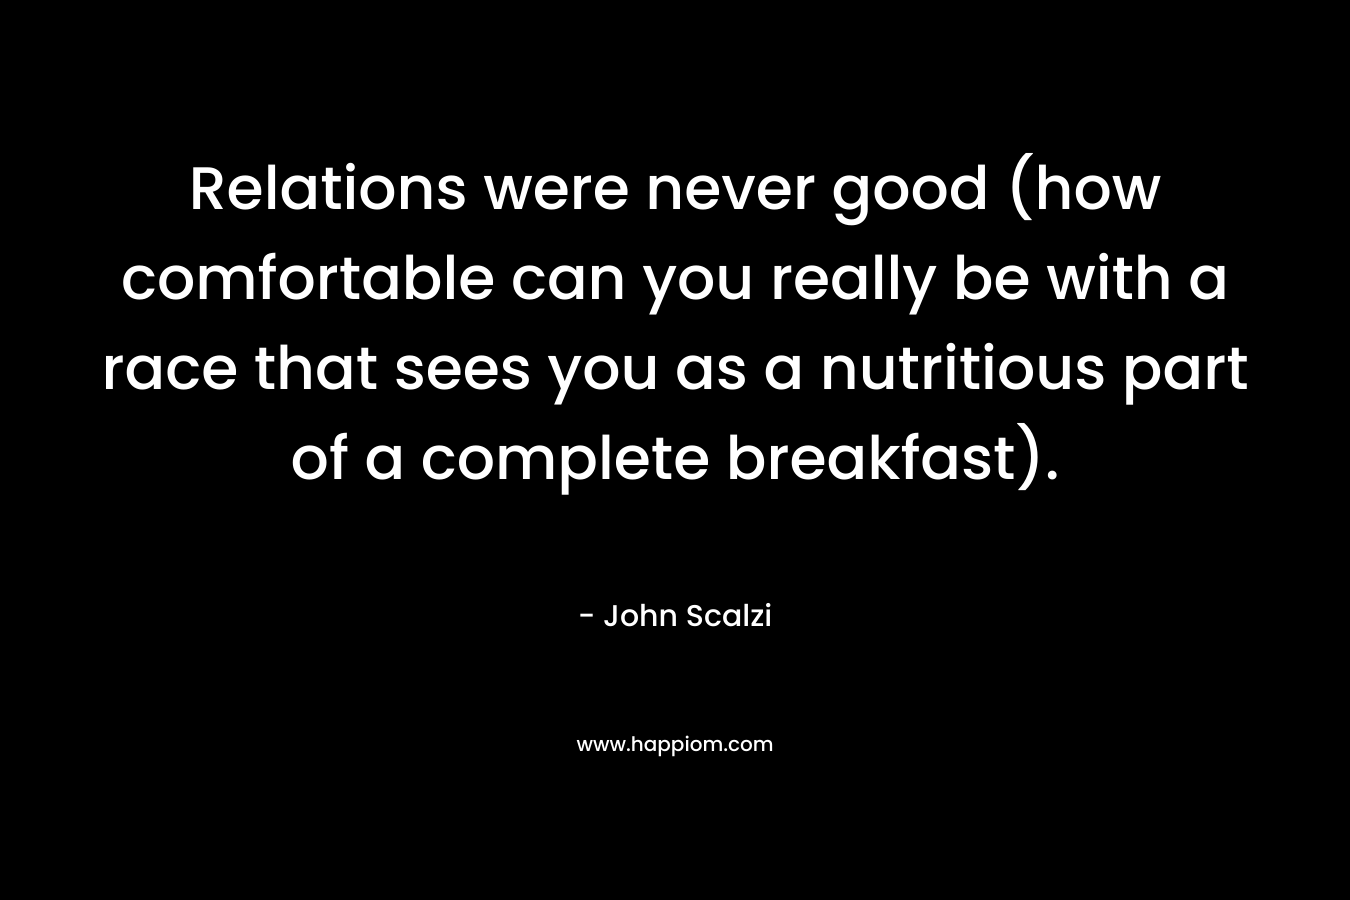 Relations were never good (how comfortable can you really be with a race that sees you as a nutritious part of a complete breakfast). – John Scalzi